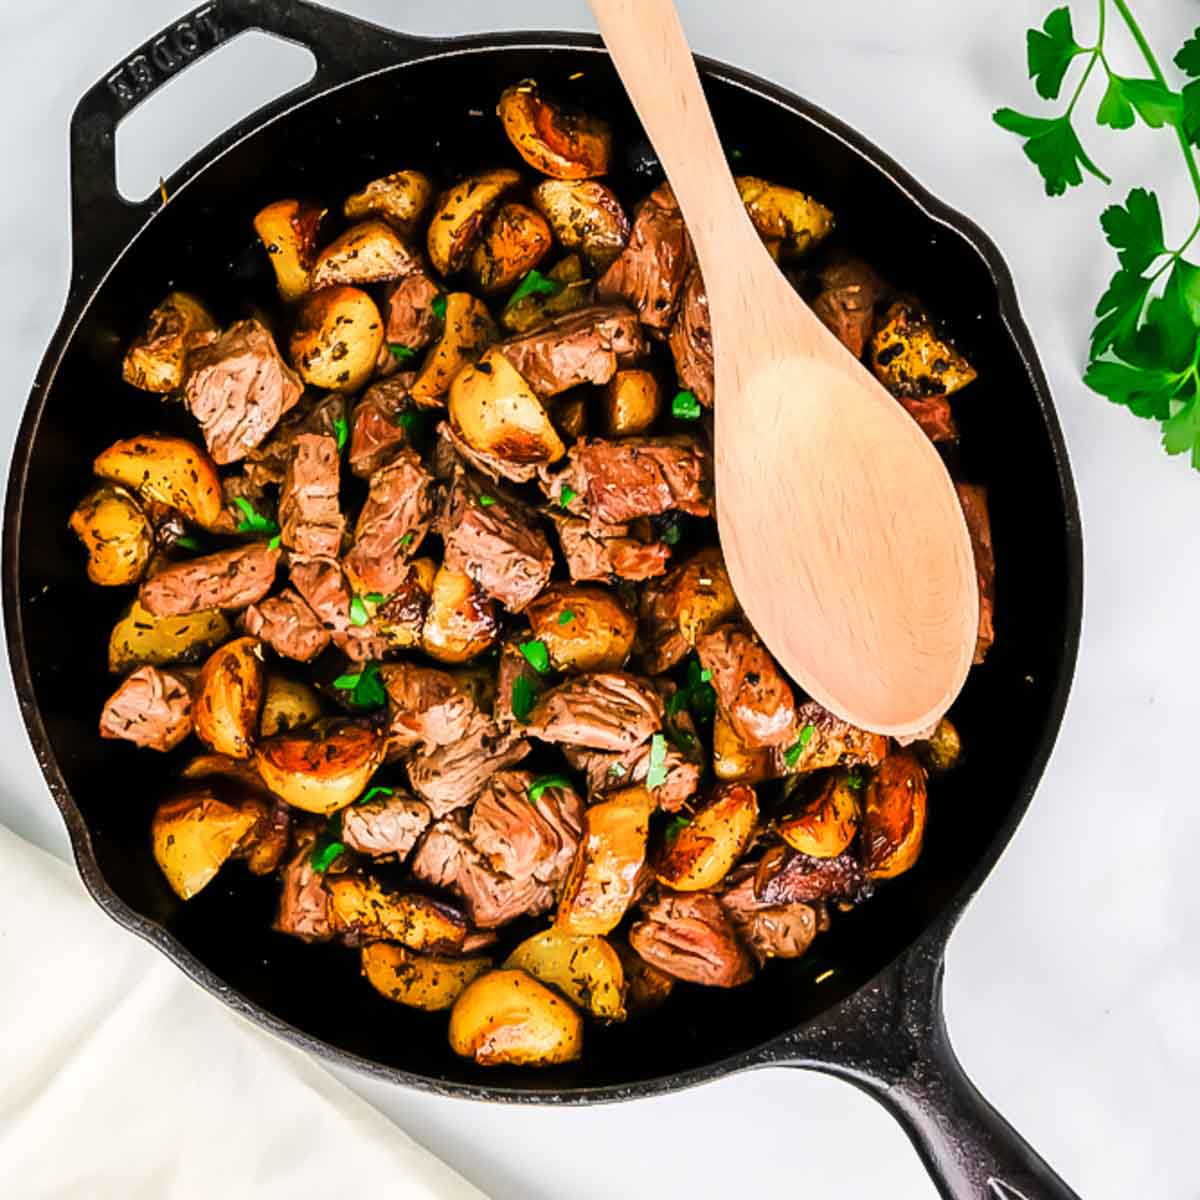 Overhead view of steak bites and potatoes in a black cast iron skillet.